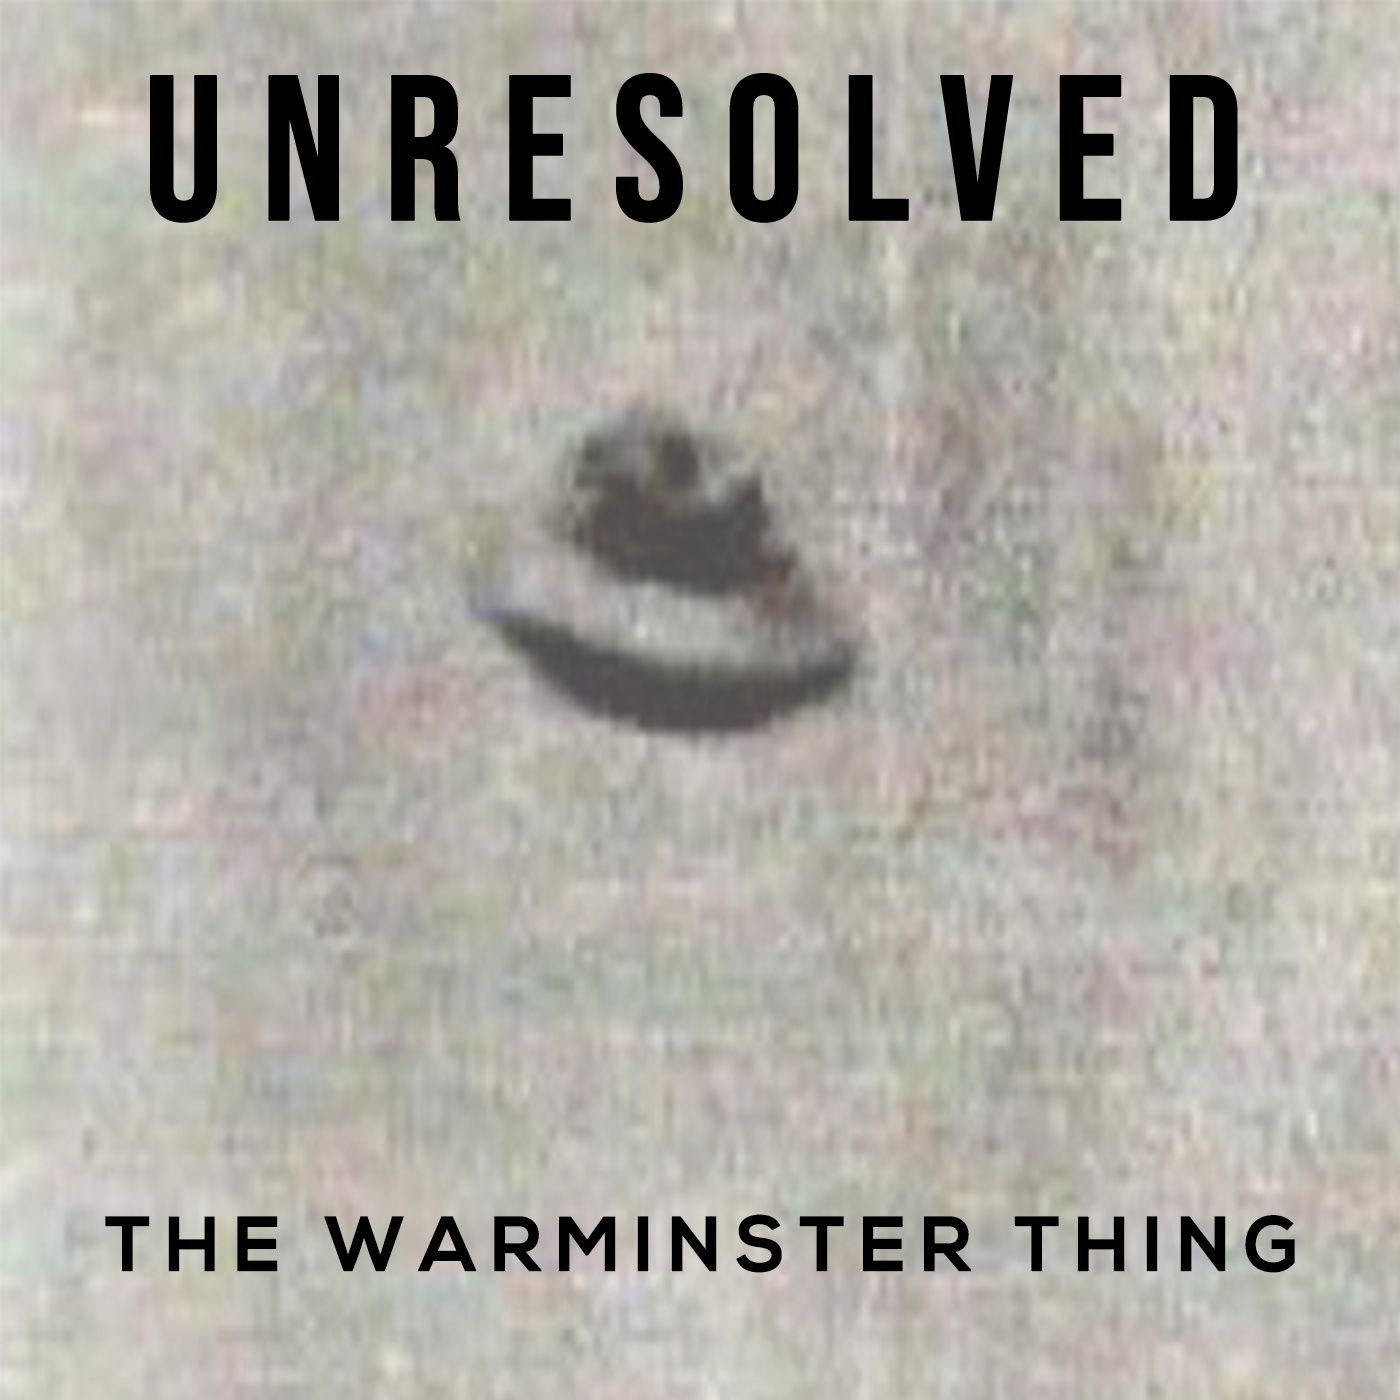 The Warminster ”Thing”